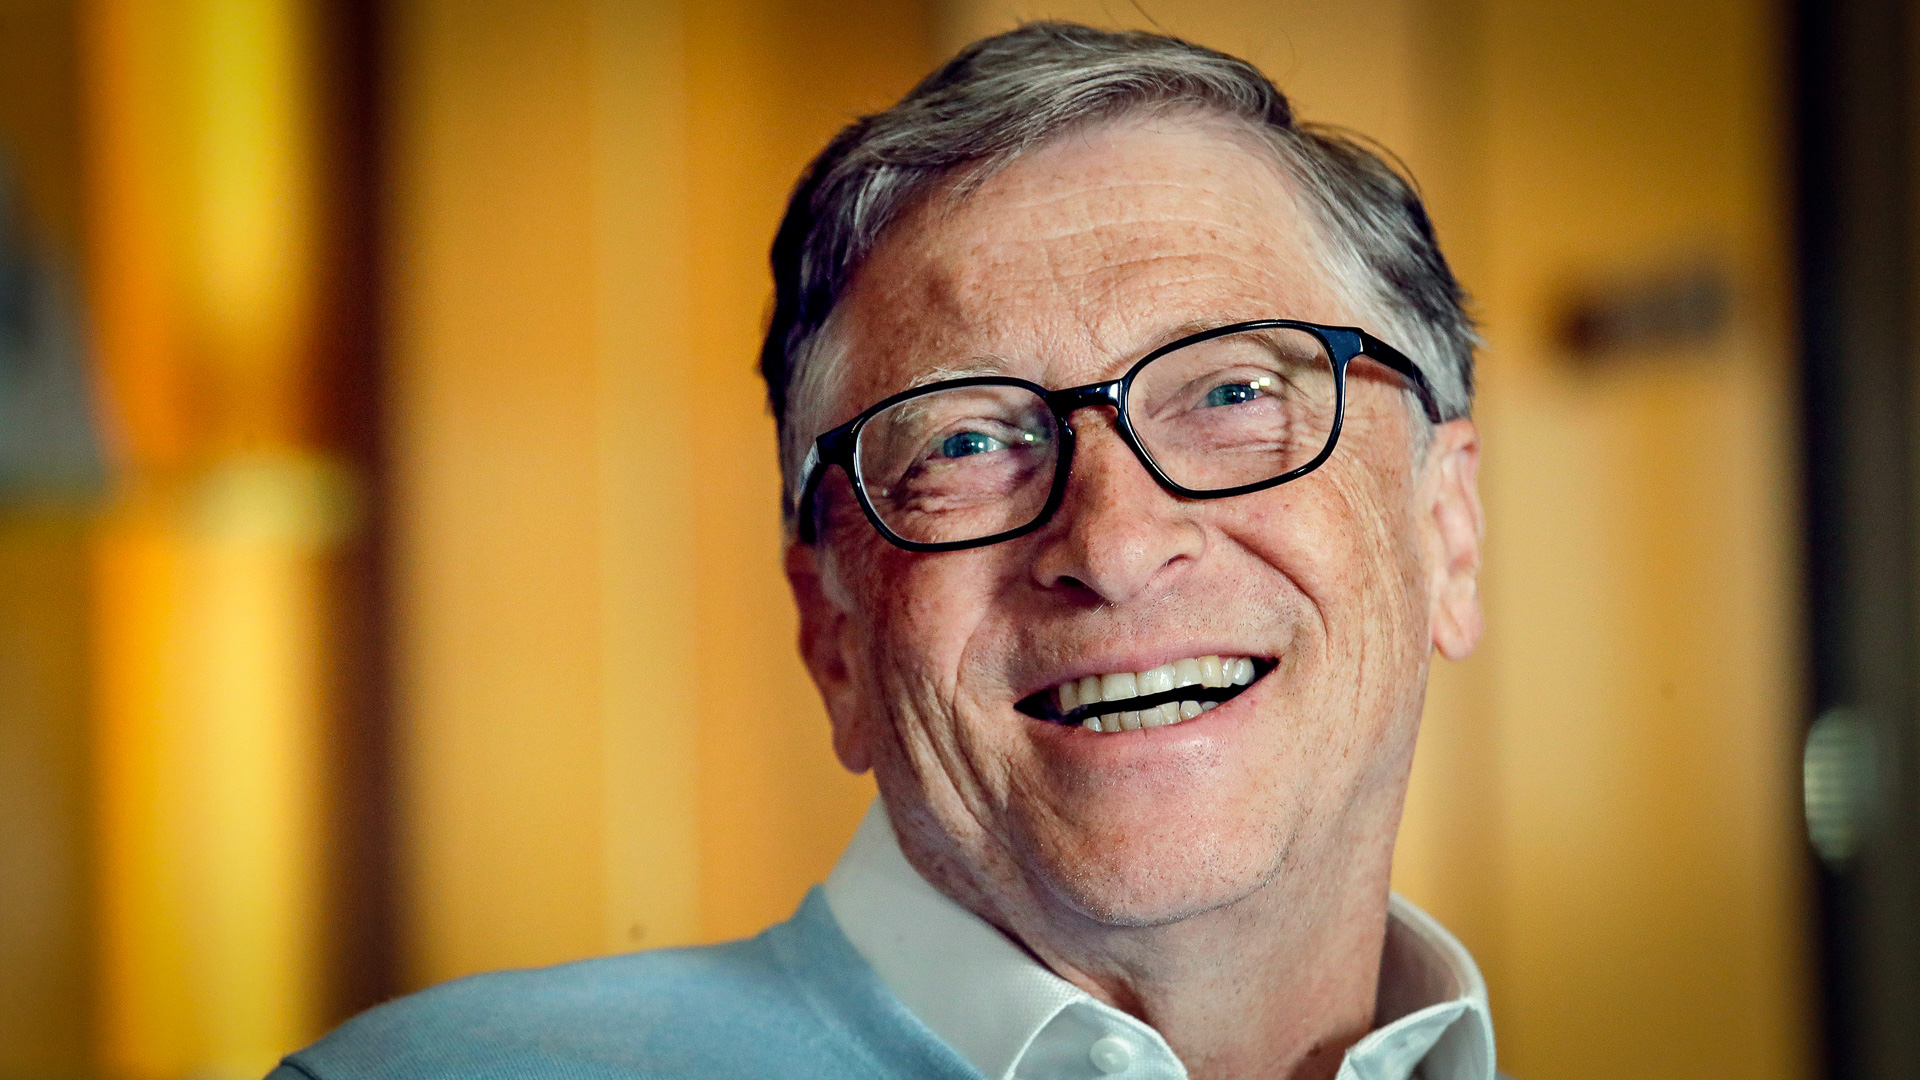 2022-Bill Gates Net Worth How Rich Is He Really?